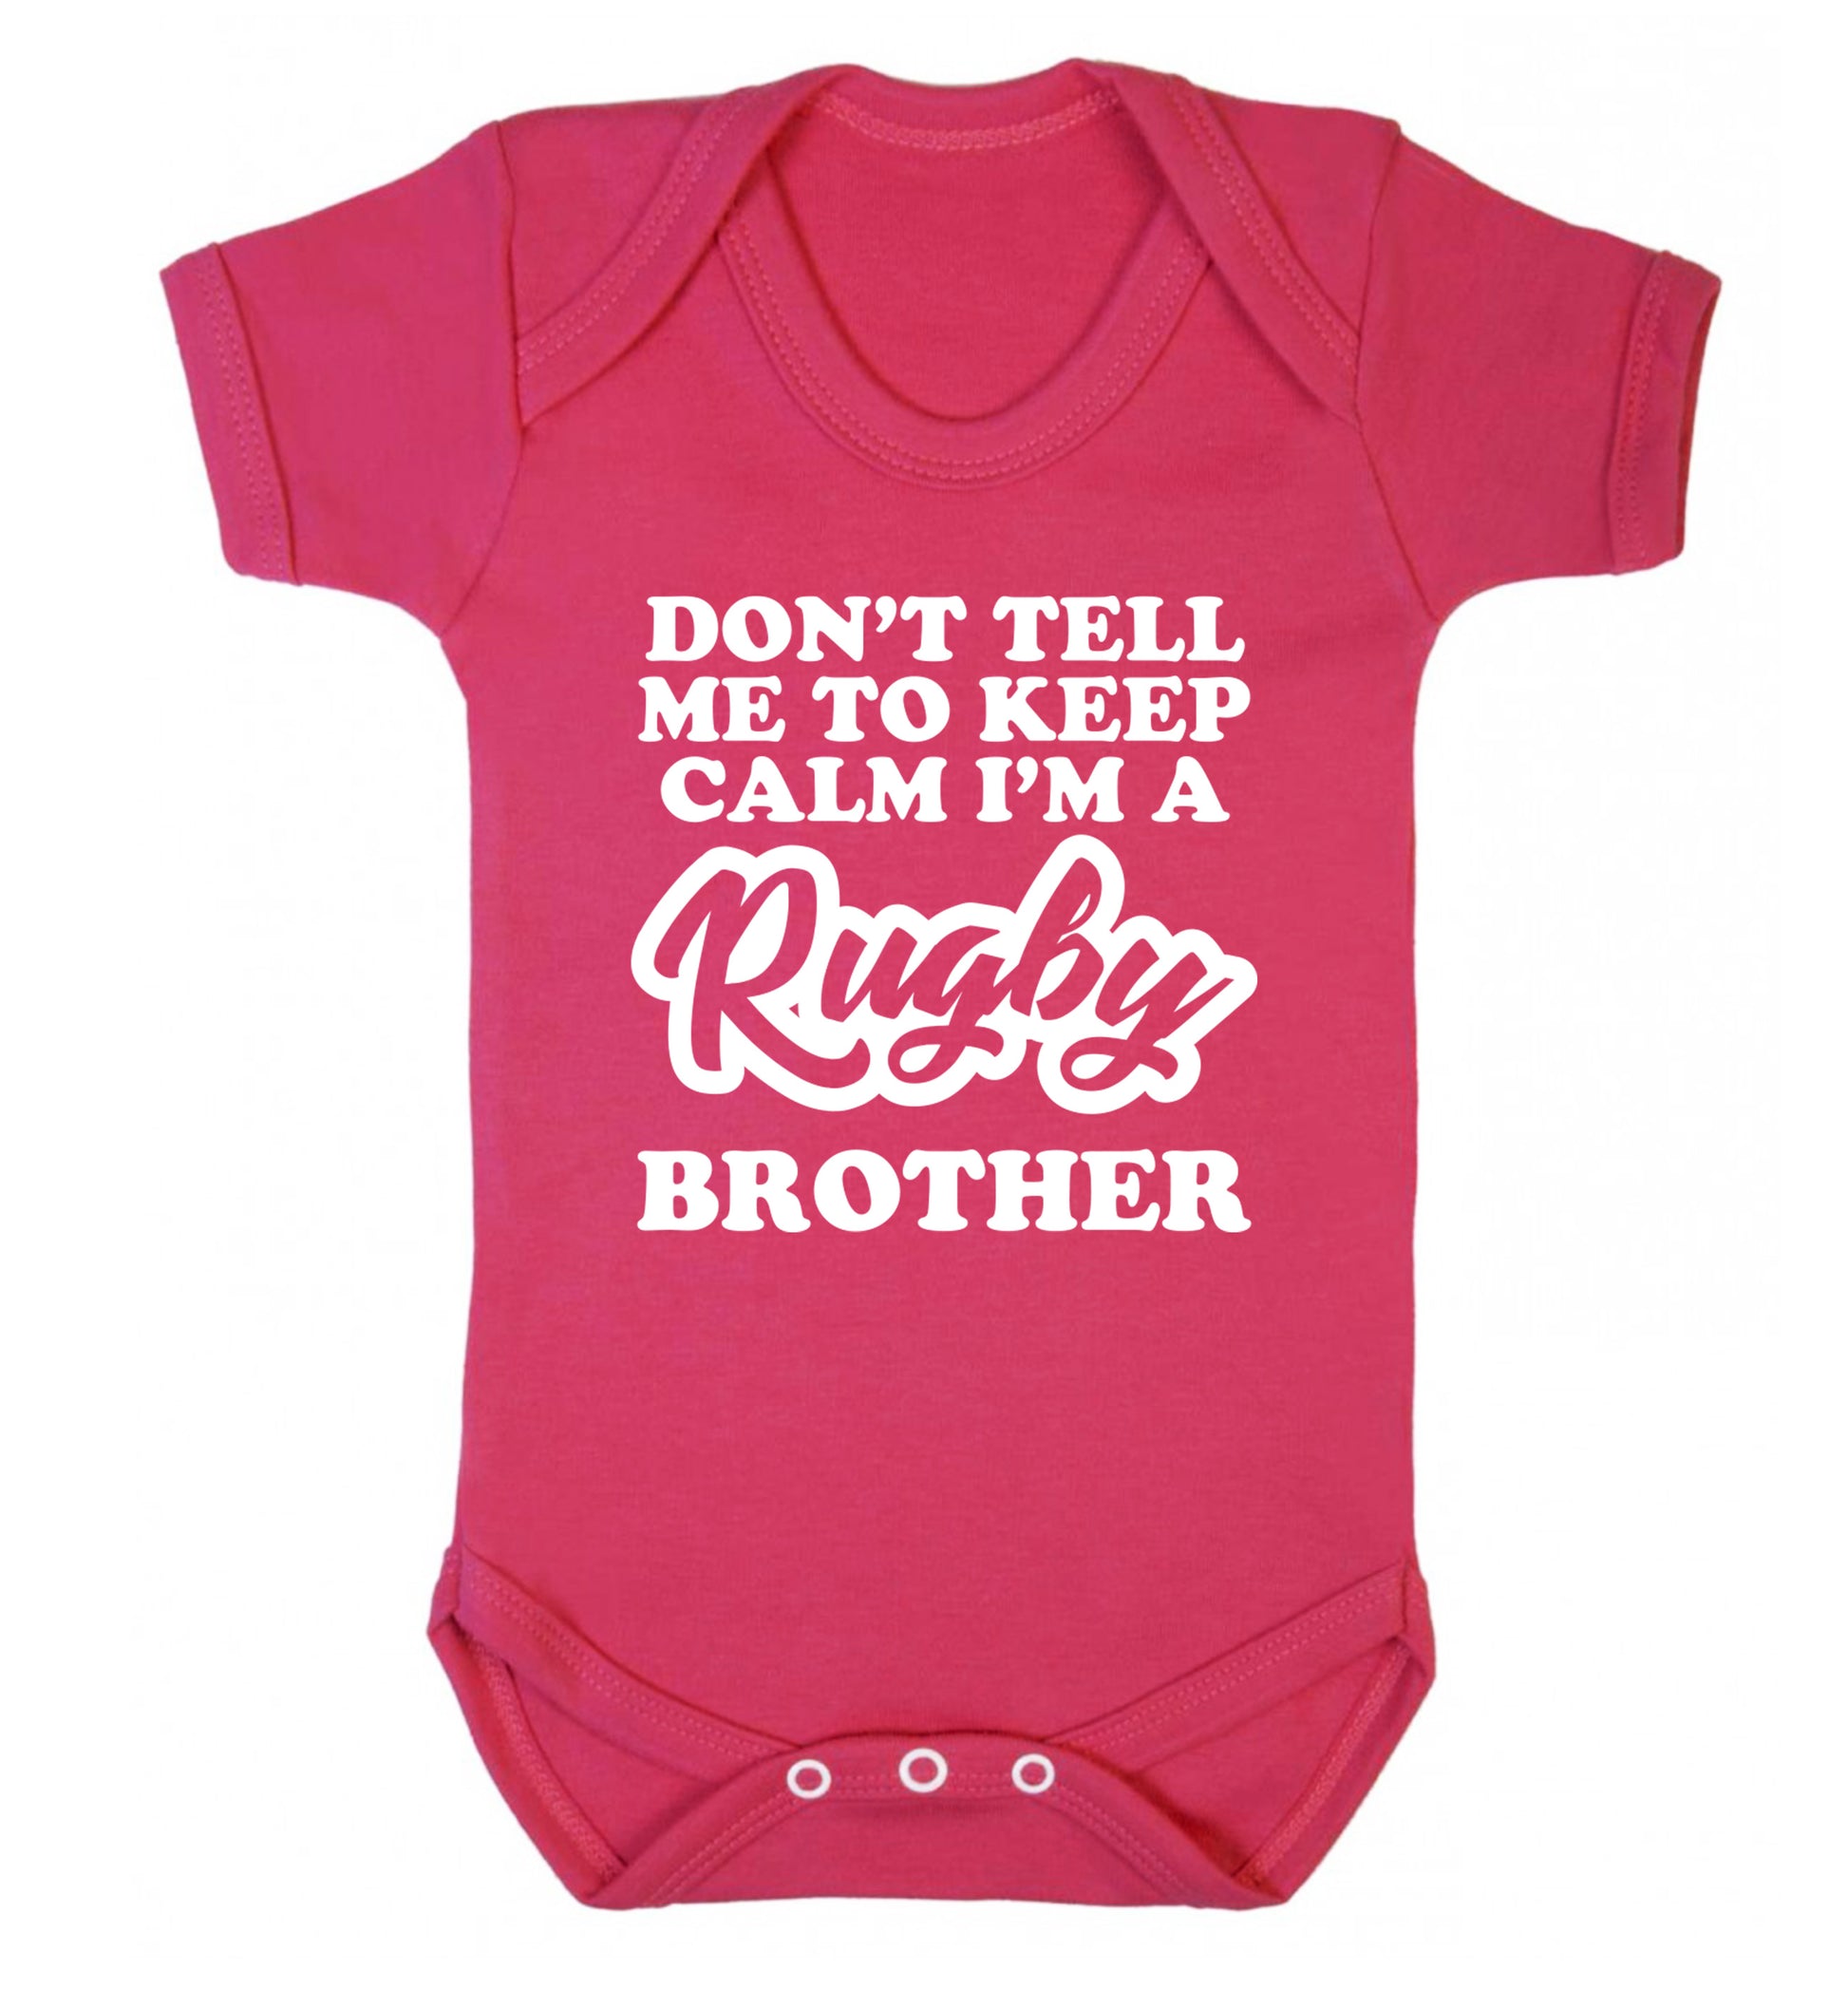 Don't tell me keep calm I'm a rugby brother Baby Vest dark pink 18-24 months